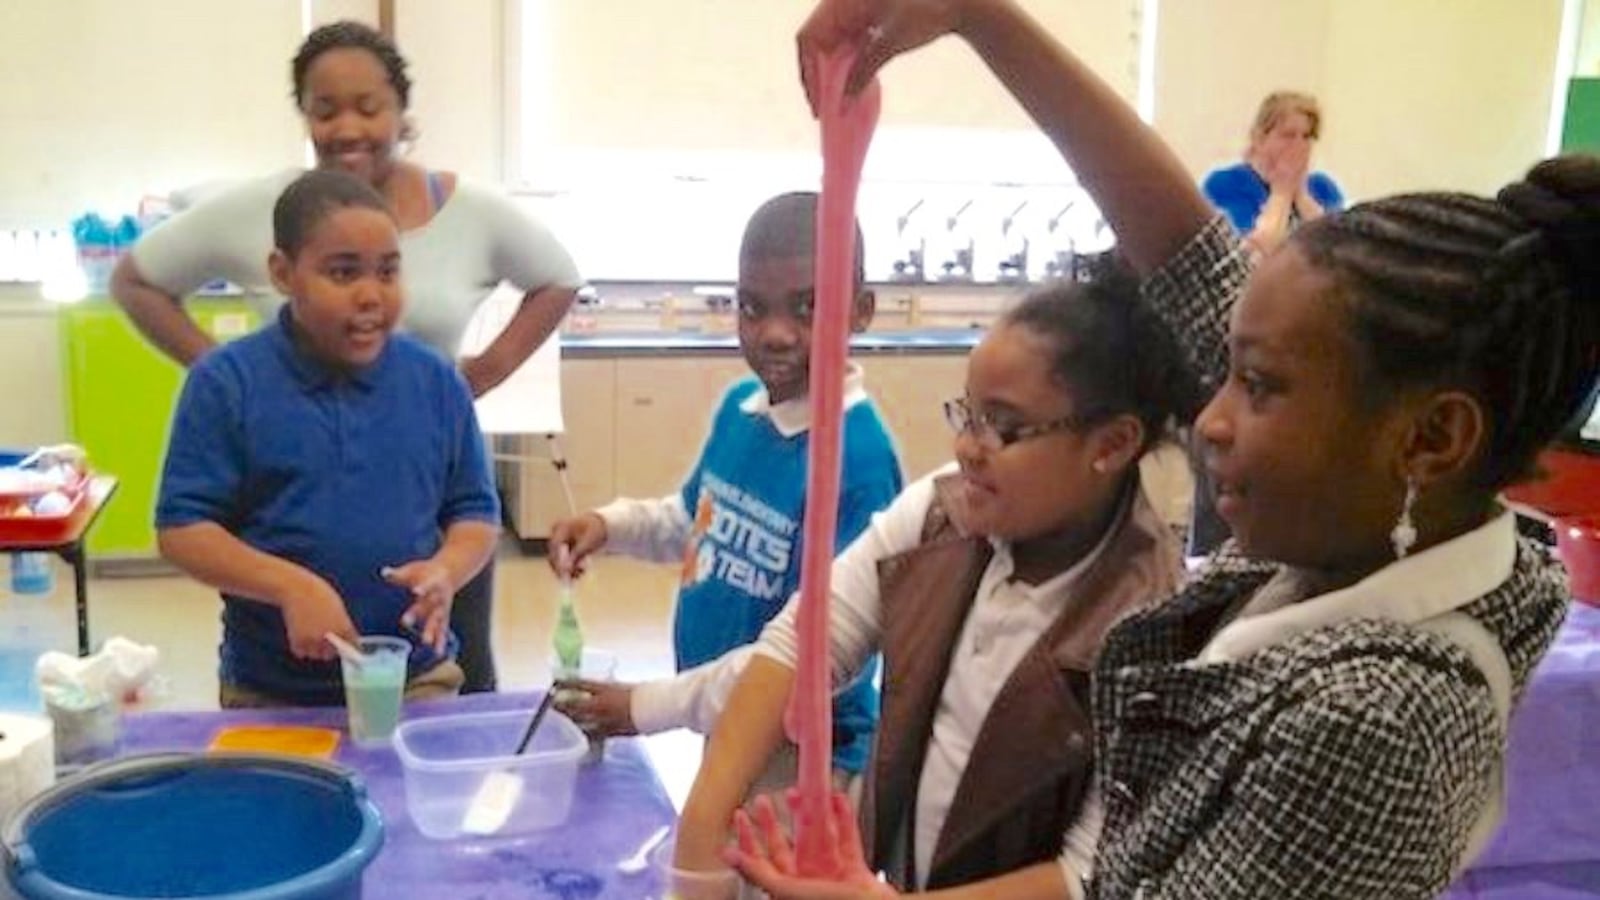 Students at Whitehaven Elementary School in Memphis participate in a 2014 STEM expo to develop skills in science, engineer, technology, and math.